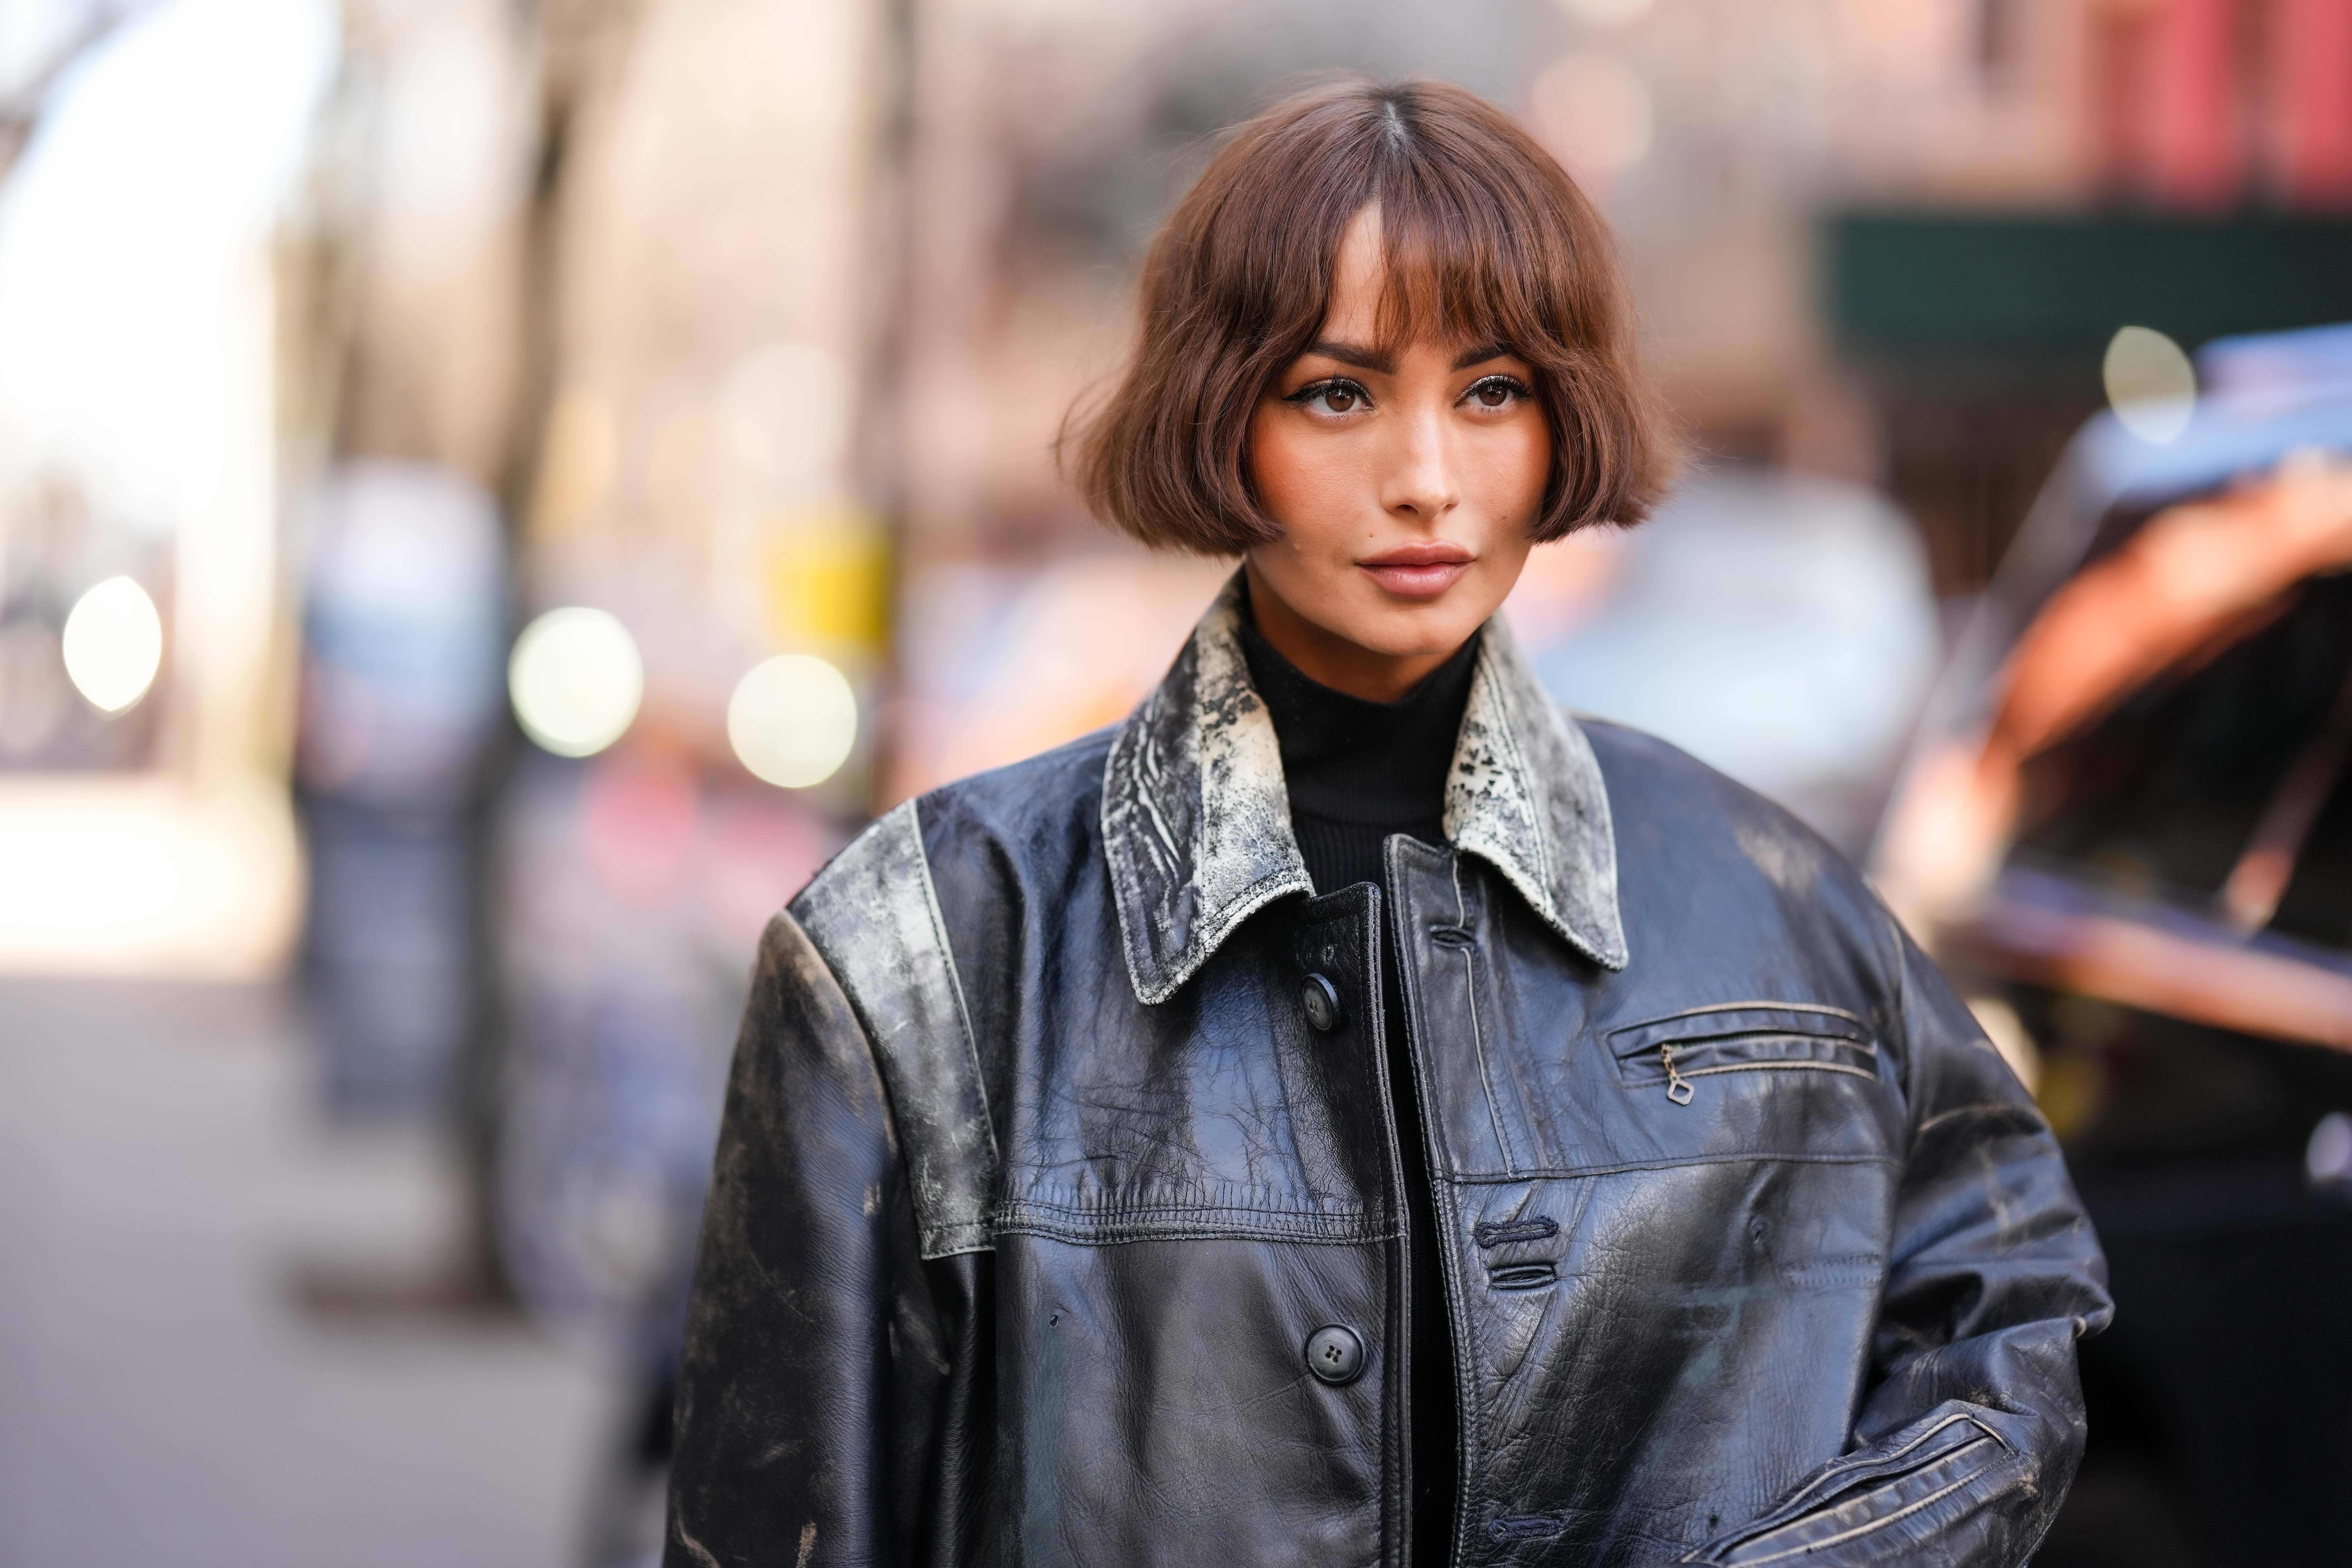 Wearing a Leather Jacket in the Winter - The Style Contour